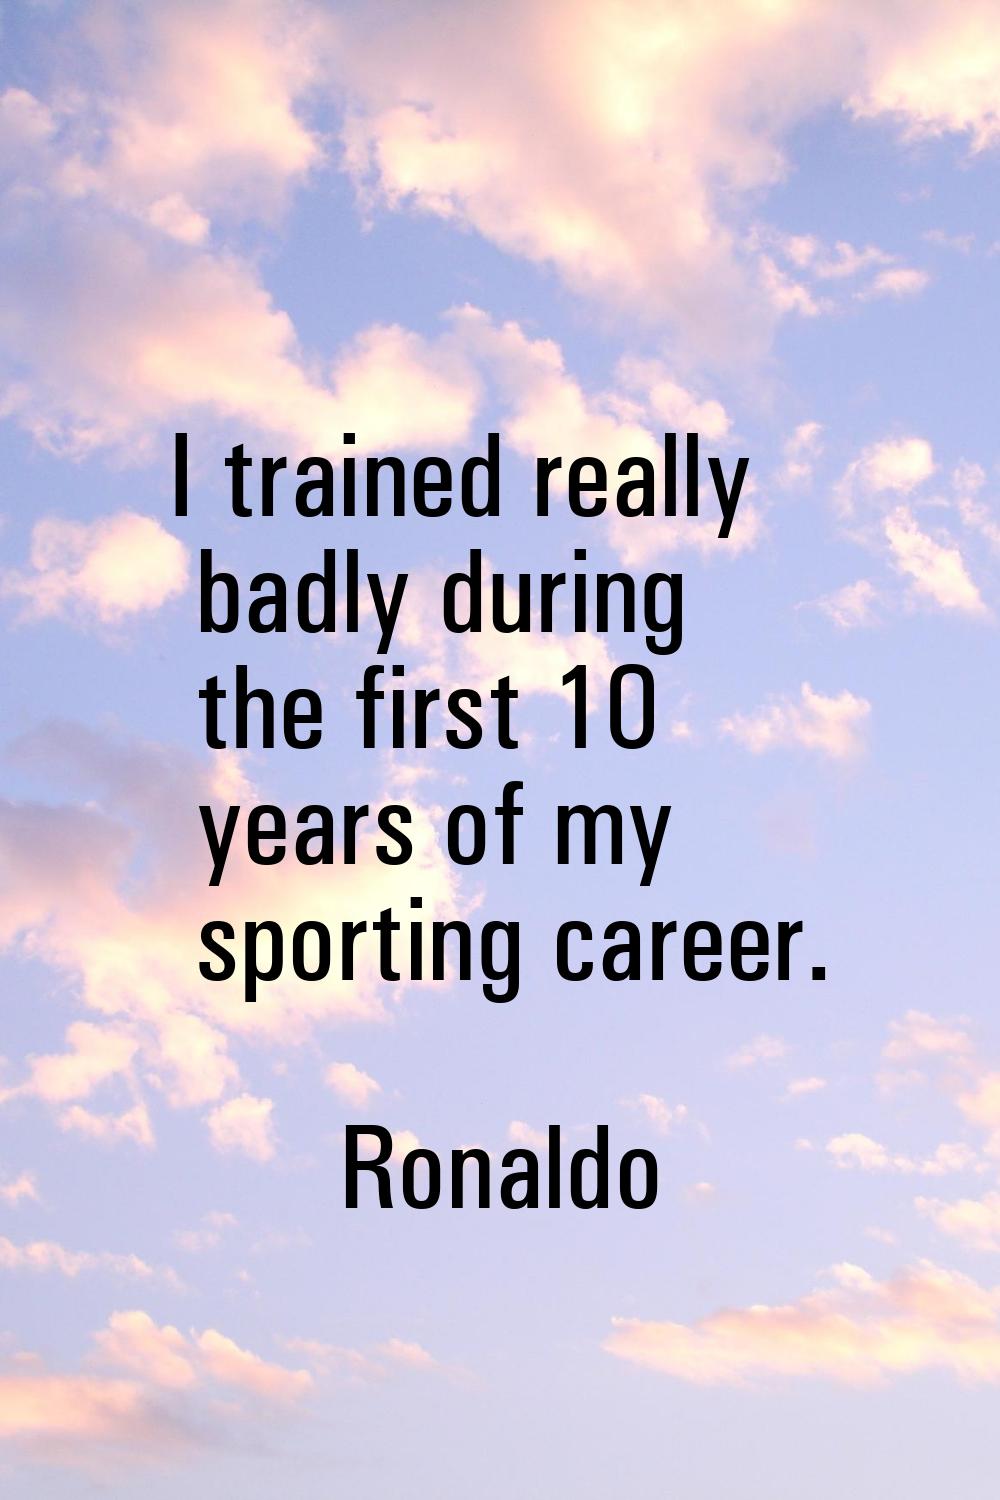 I trained really badly during the first 10 years of my sporting career.